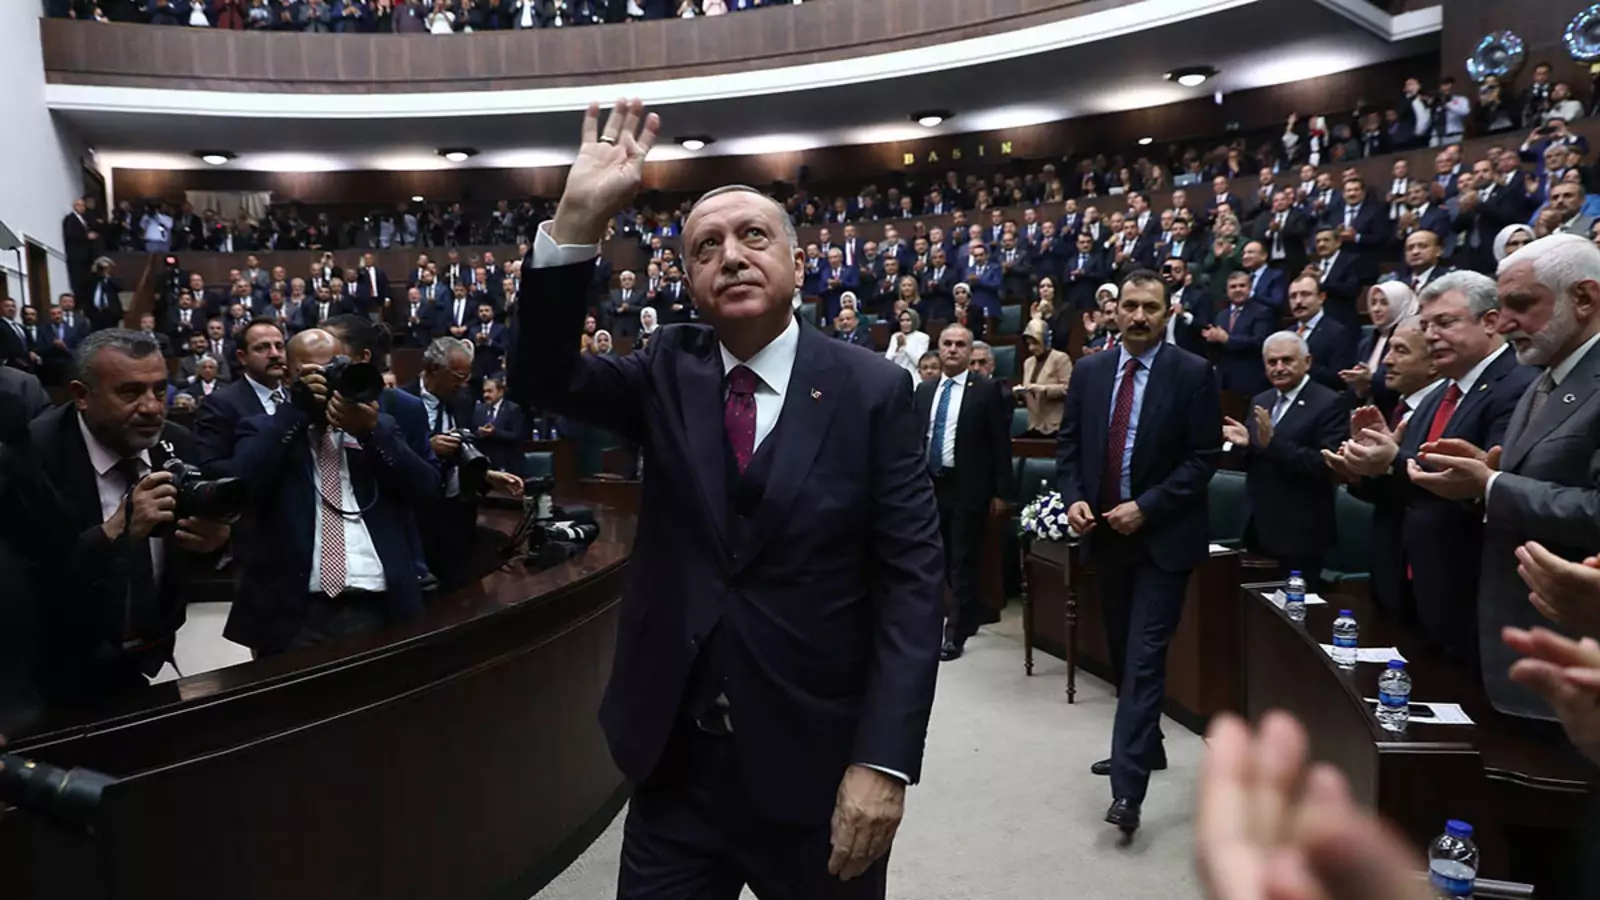  Turkish President Recep Tayyip Erdogan waves to members of his party during a parliamentary group meeting at the Grand National Assembly of Turkey.